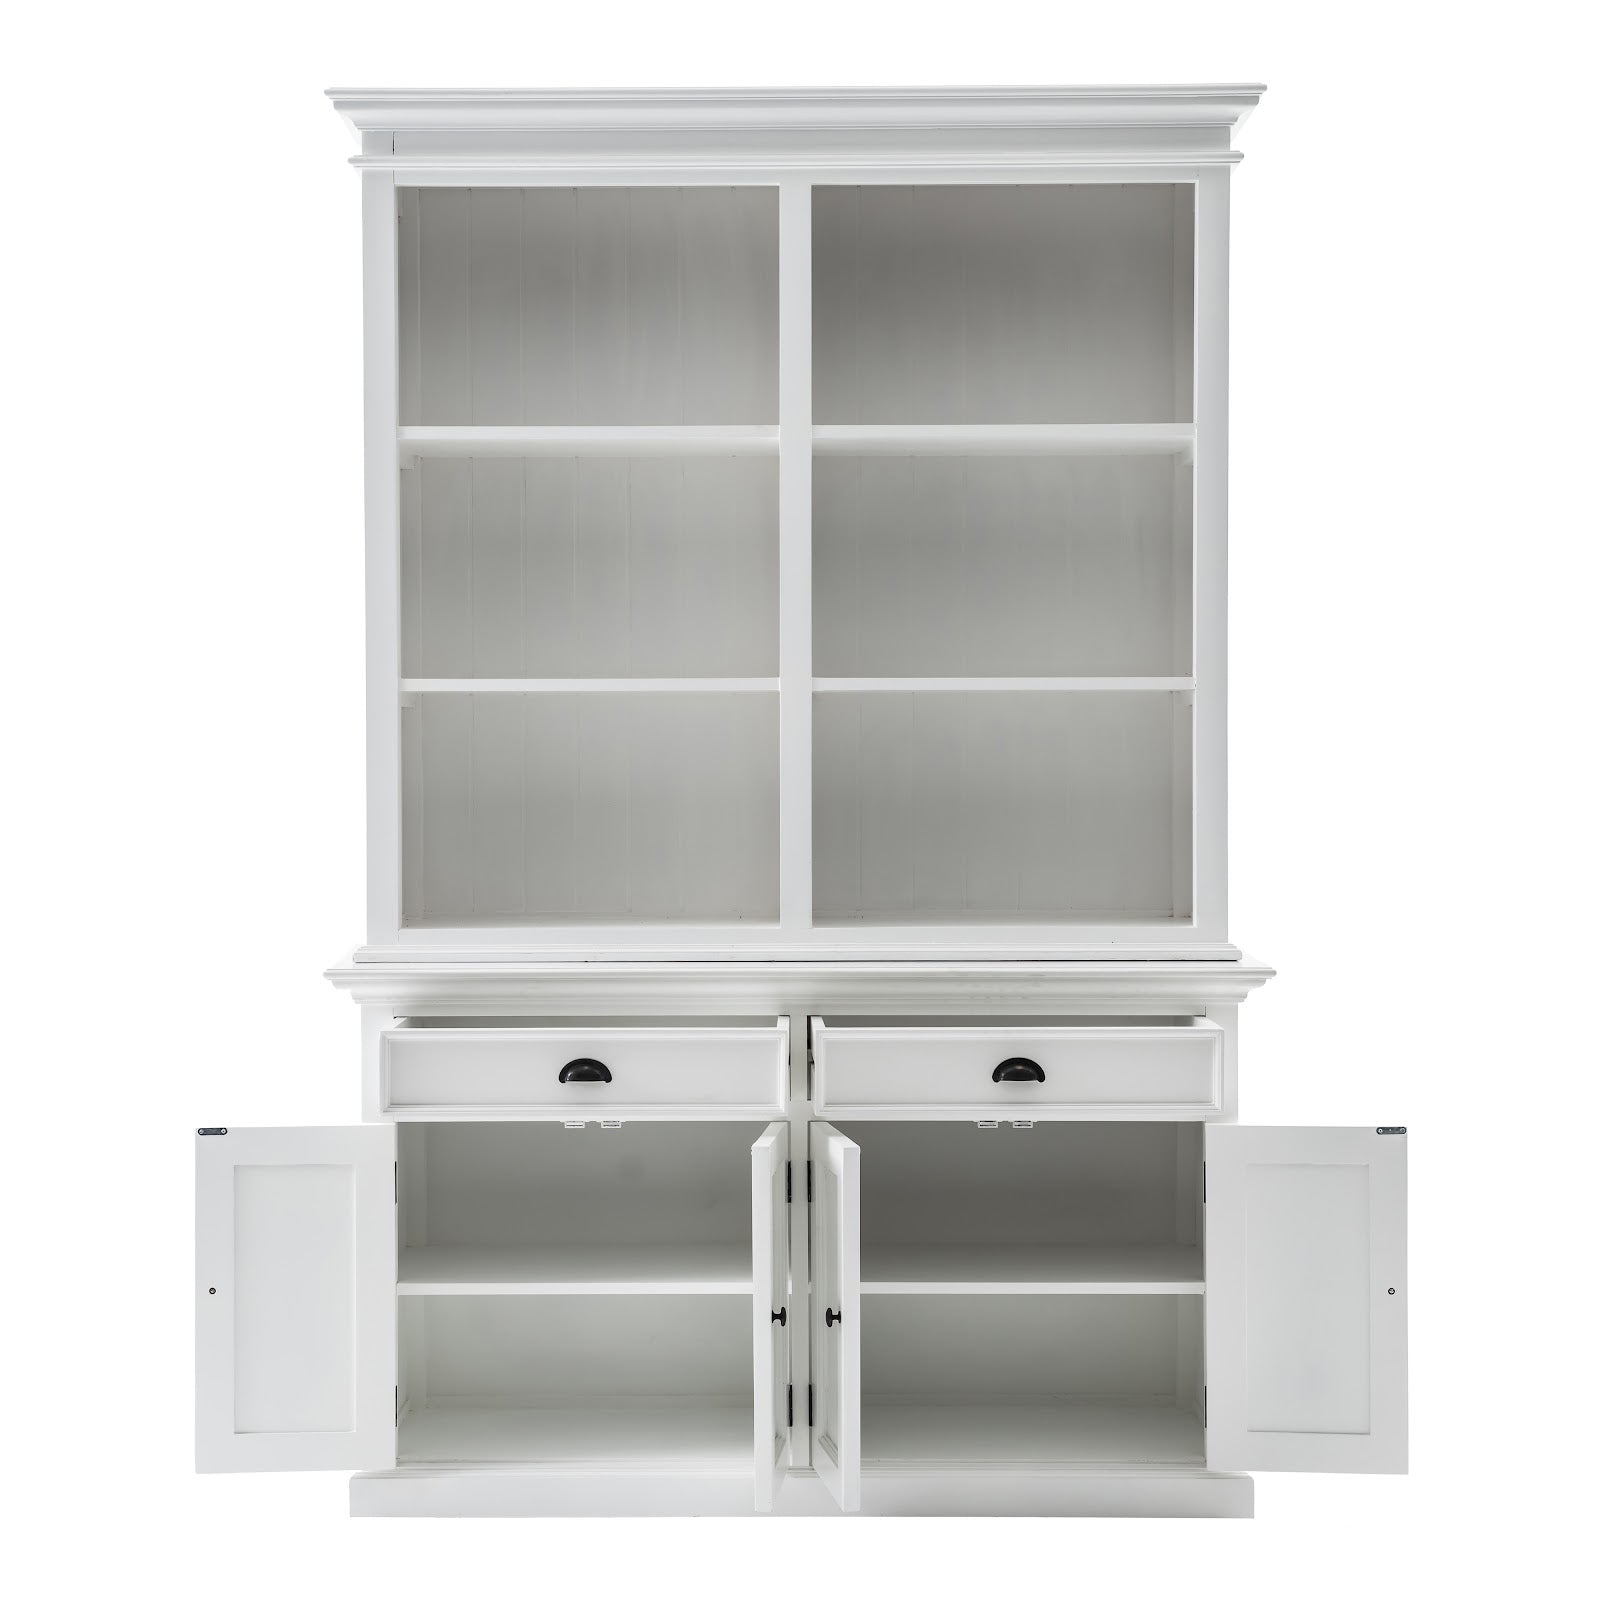 Buffet Hutch Unit with 6 Shelves